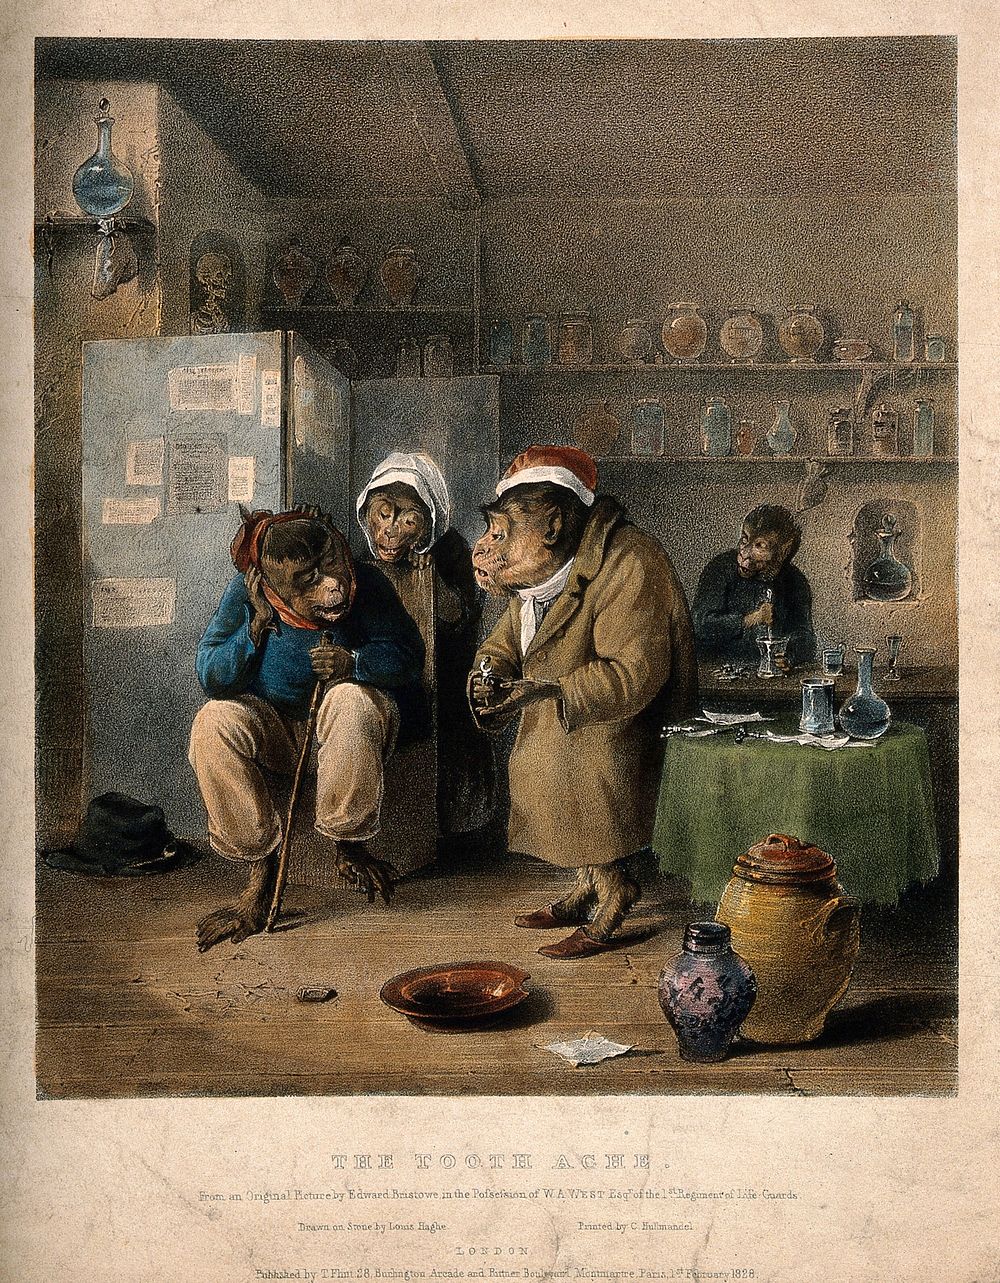 Monkeys representing human beings in a tooth-drawer's surgery. Lithograph by L. Haghe after E. Bristow, 1828.